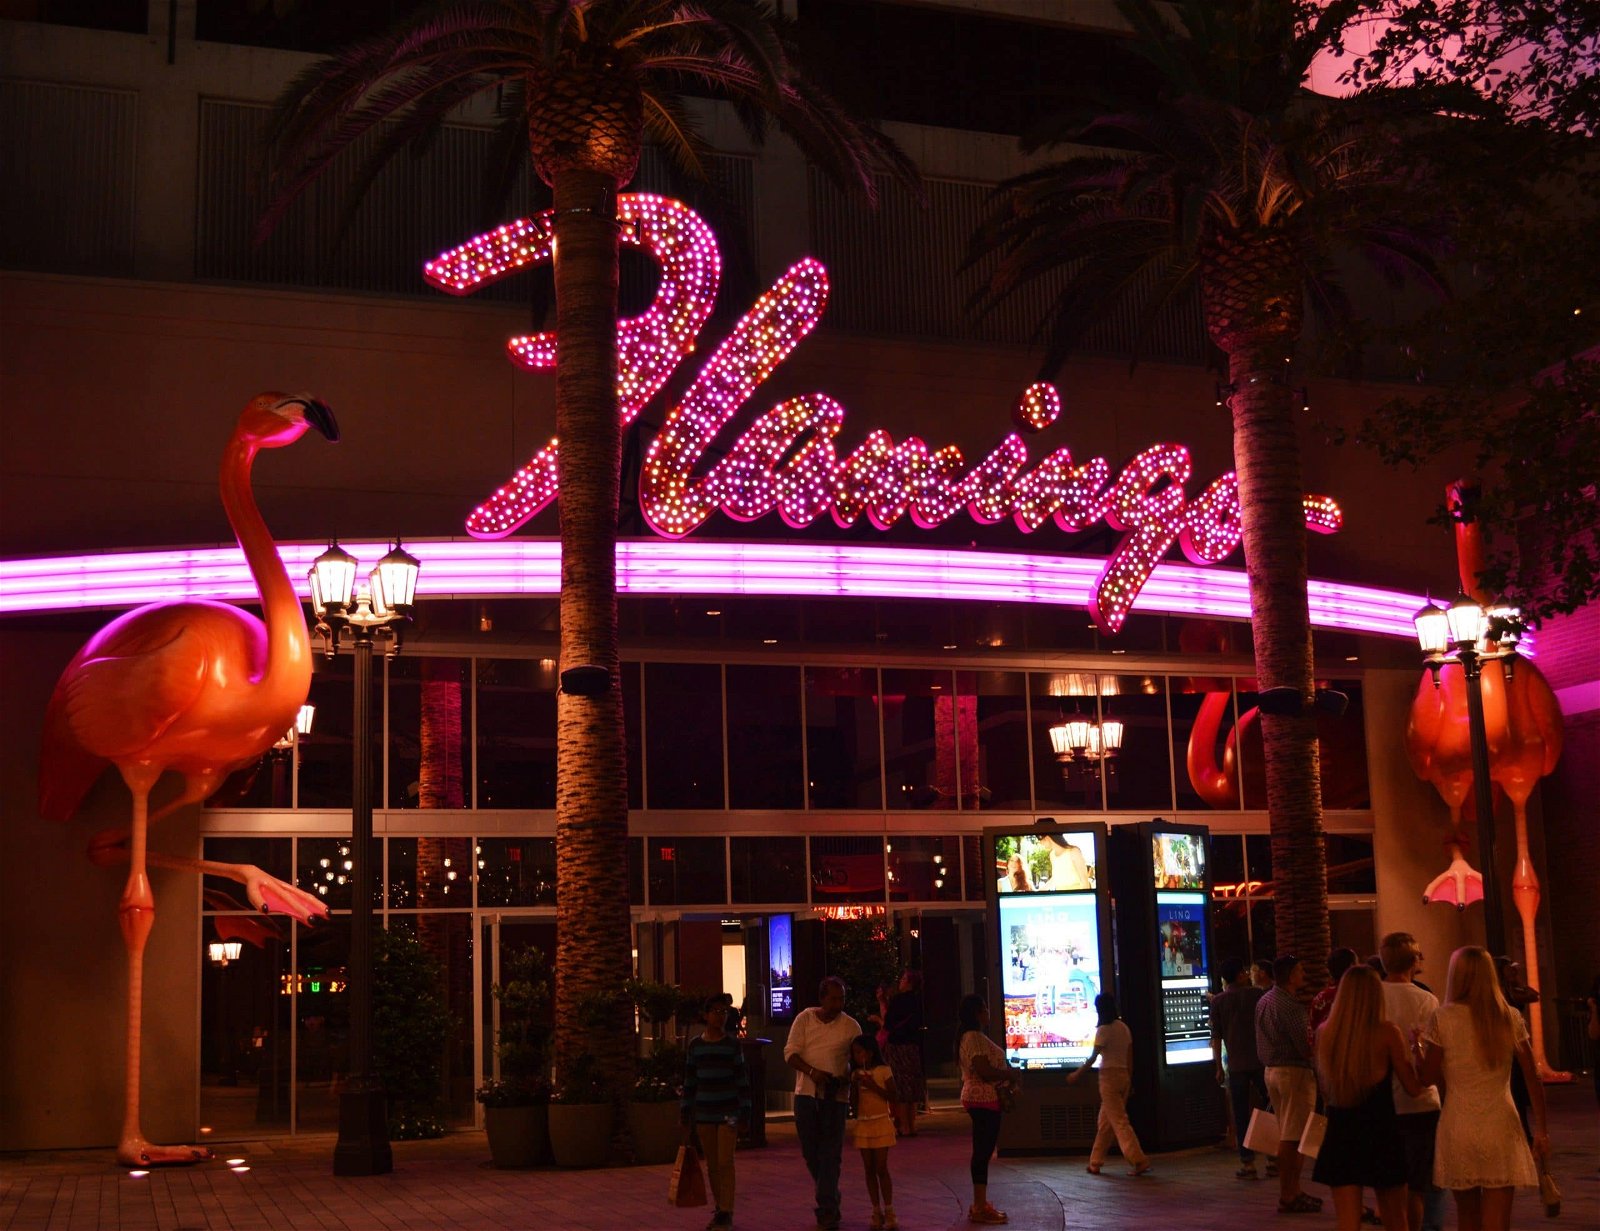 The Flamingo is the casino that started the Strip